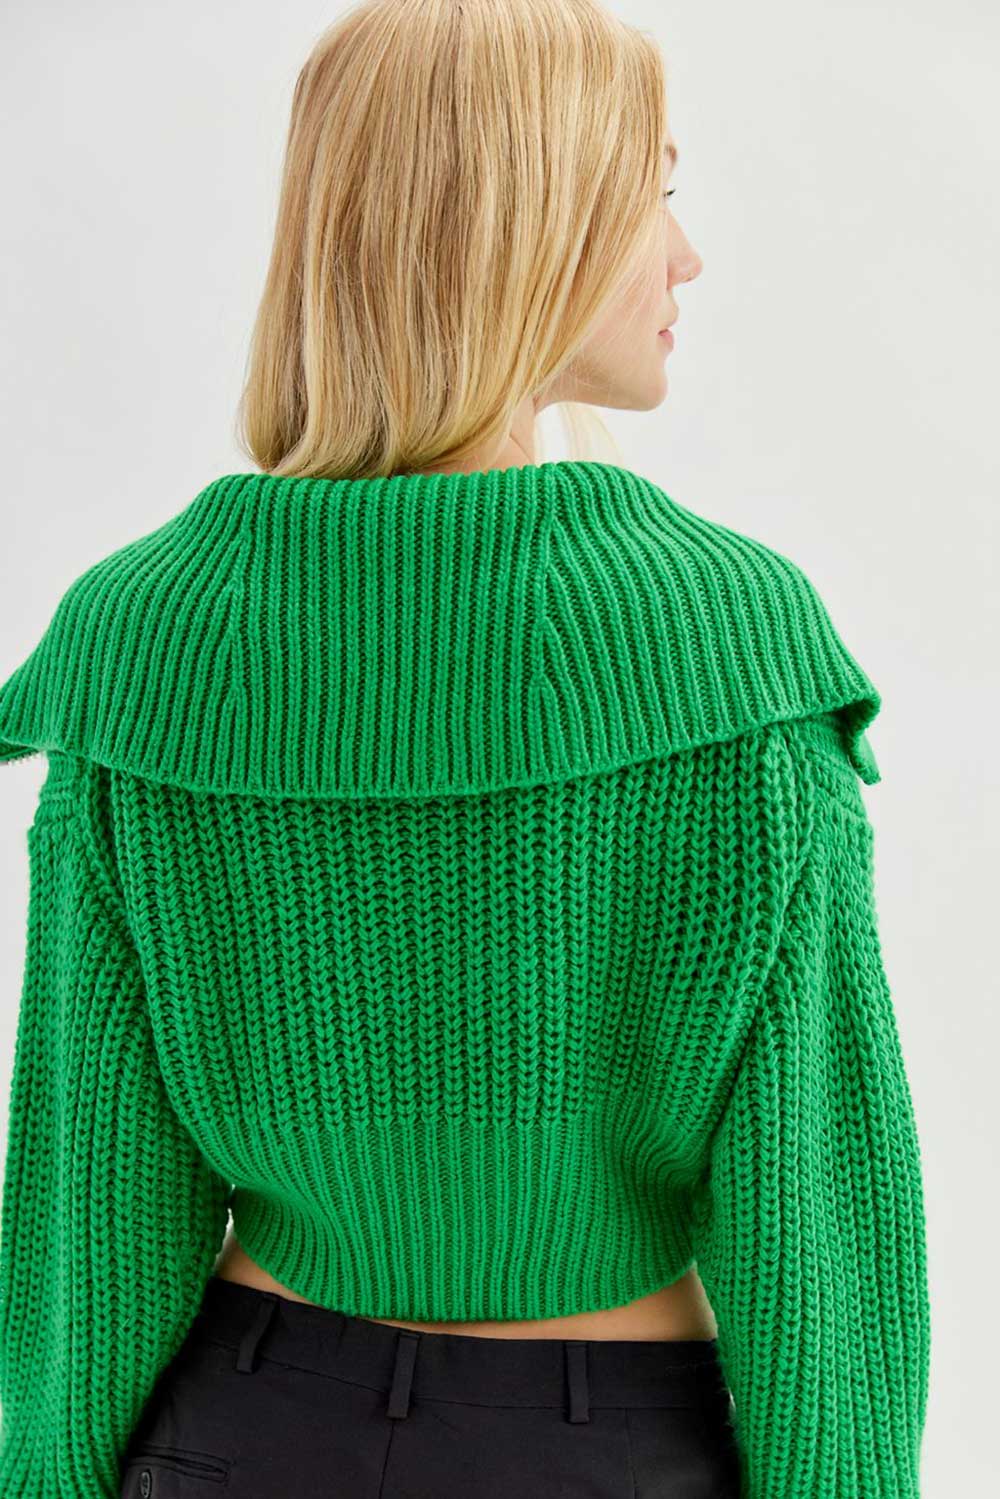 A model seen from the back wearing a knit bright green cardigan from Urban Outfitters with a large collar.